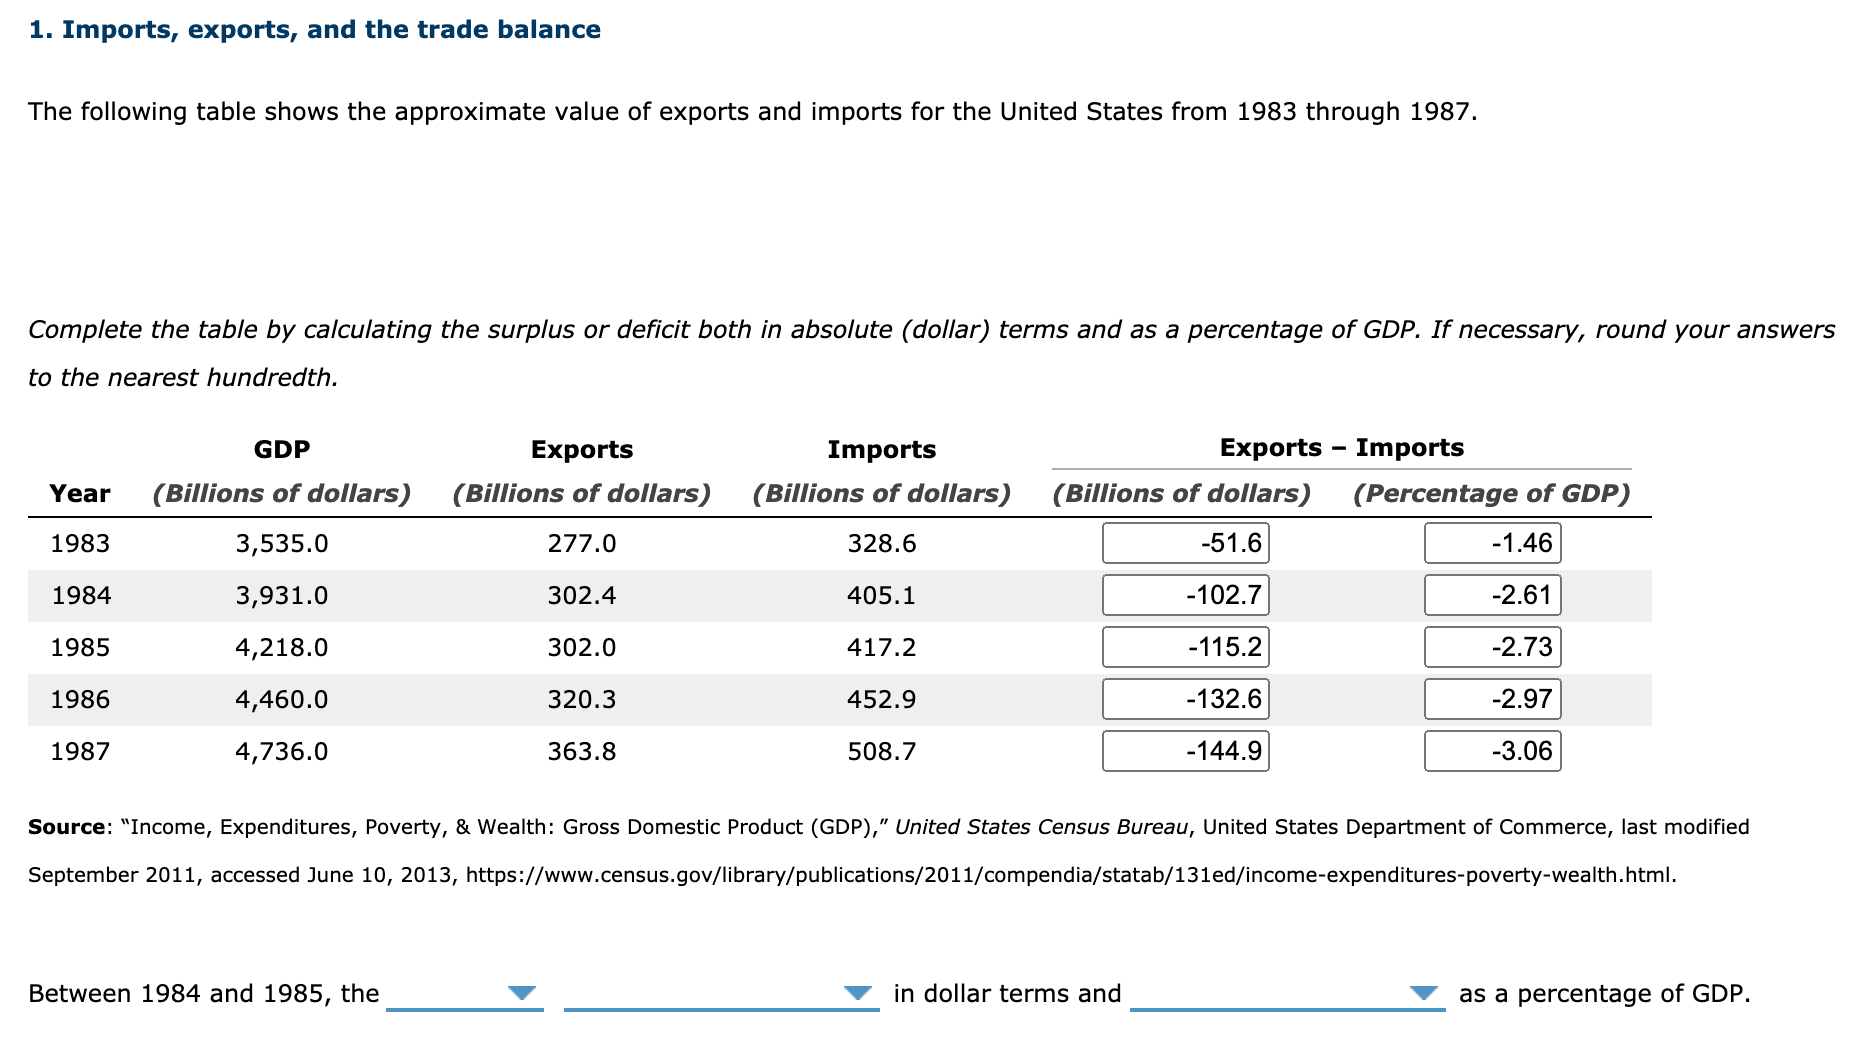 Complete the table by calculating the surplus or deficit both in absolute (dollar) terms and as a percentage of GDP. If necessary, round your answers
to the nearest hundredth.
GDP
Exports
Imports
Exports - Imports
Year
(Billions of dollars)
(Billions of dollars)
(Billions of dollars)
(Billions of dollars)
(Percentage of GDP)
1983
3,535.0
277.0
328.6
-51.6
-1.46
1984
3,931.0
302.4
405.1
-102.7
-2.61
1985
4,218.0
302.0
417.2
-115.2
-2.73
1986
4,460.0
320.3
452.9
-132.6
-2.97
1987
4,736.0
363.8
508.7
-144.9
-3.06
Source: "Income, Expenditures, Poverty, & Wealth: Gross Domestic Product (GDP)," United States Census Bureau, United States Department of Commerce, last modified
September 2011, accessed June 10, 2013, https://www.census.gov/library/publications/2011/compendia/statab/131ed/income-expenditures-poverty-wealth.html.
Between 1984 and 1985, the
in dollar terms and
as a percentage of GDP.
